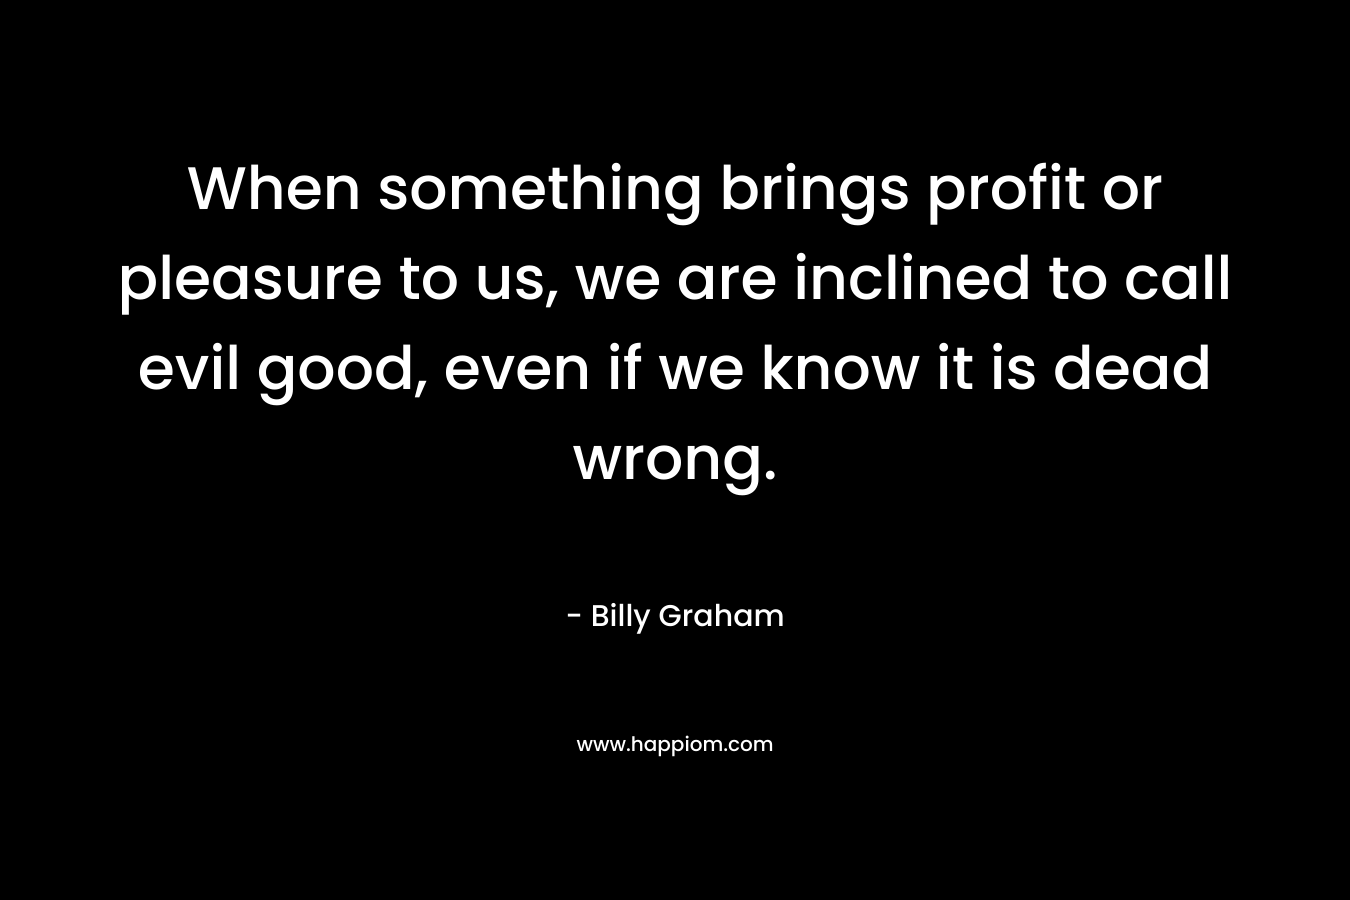 When something brings profit or pleasure to us, we are inclined to call evil good, even if we know it is dead wrong.